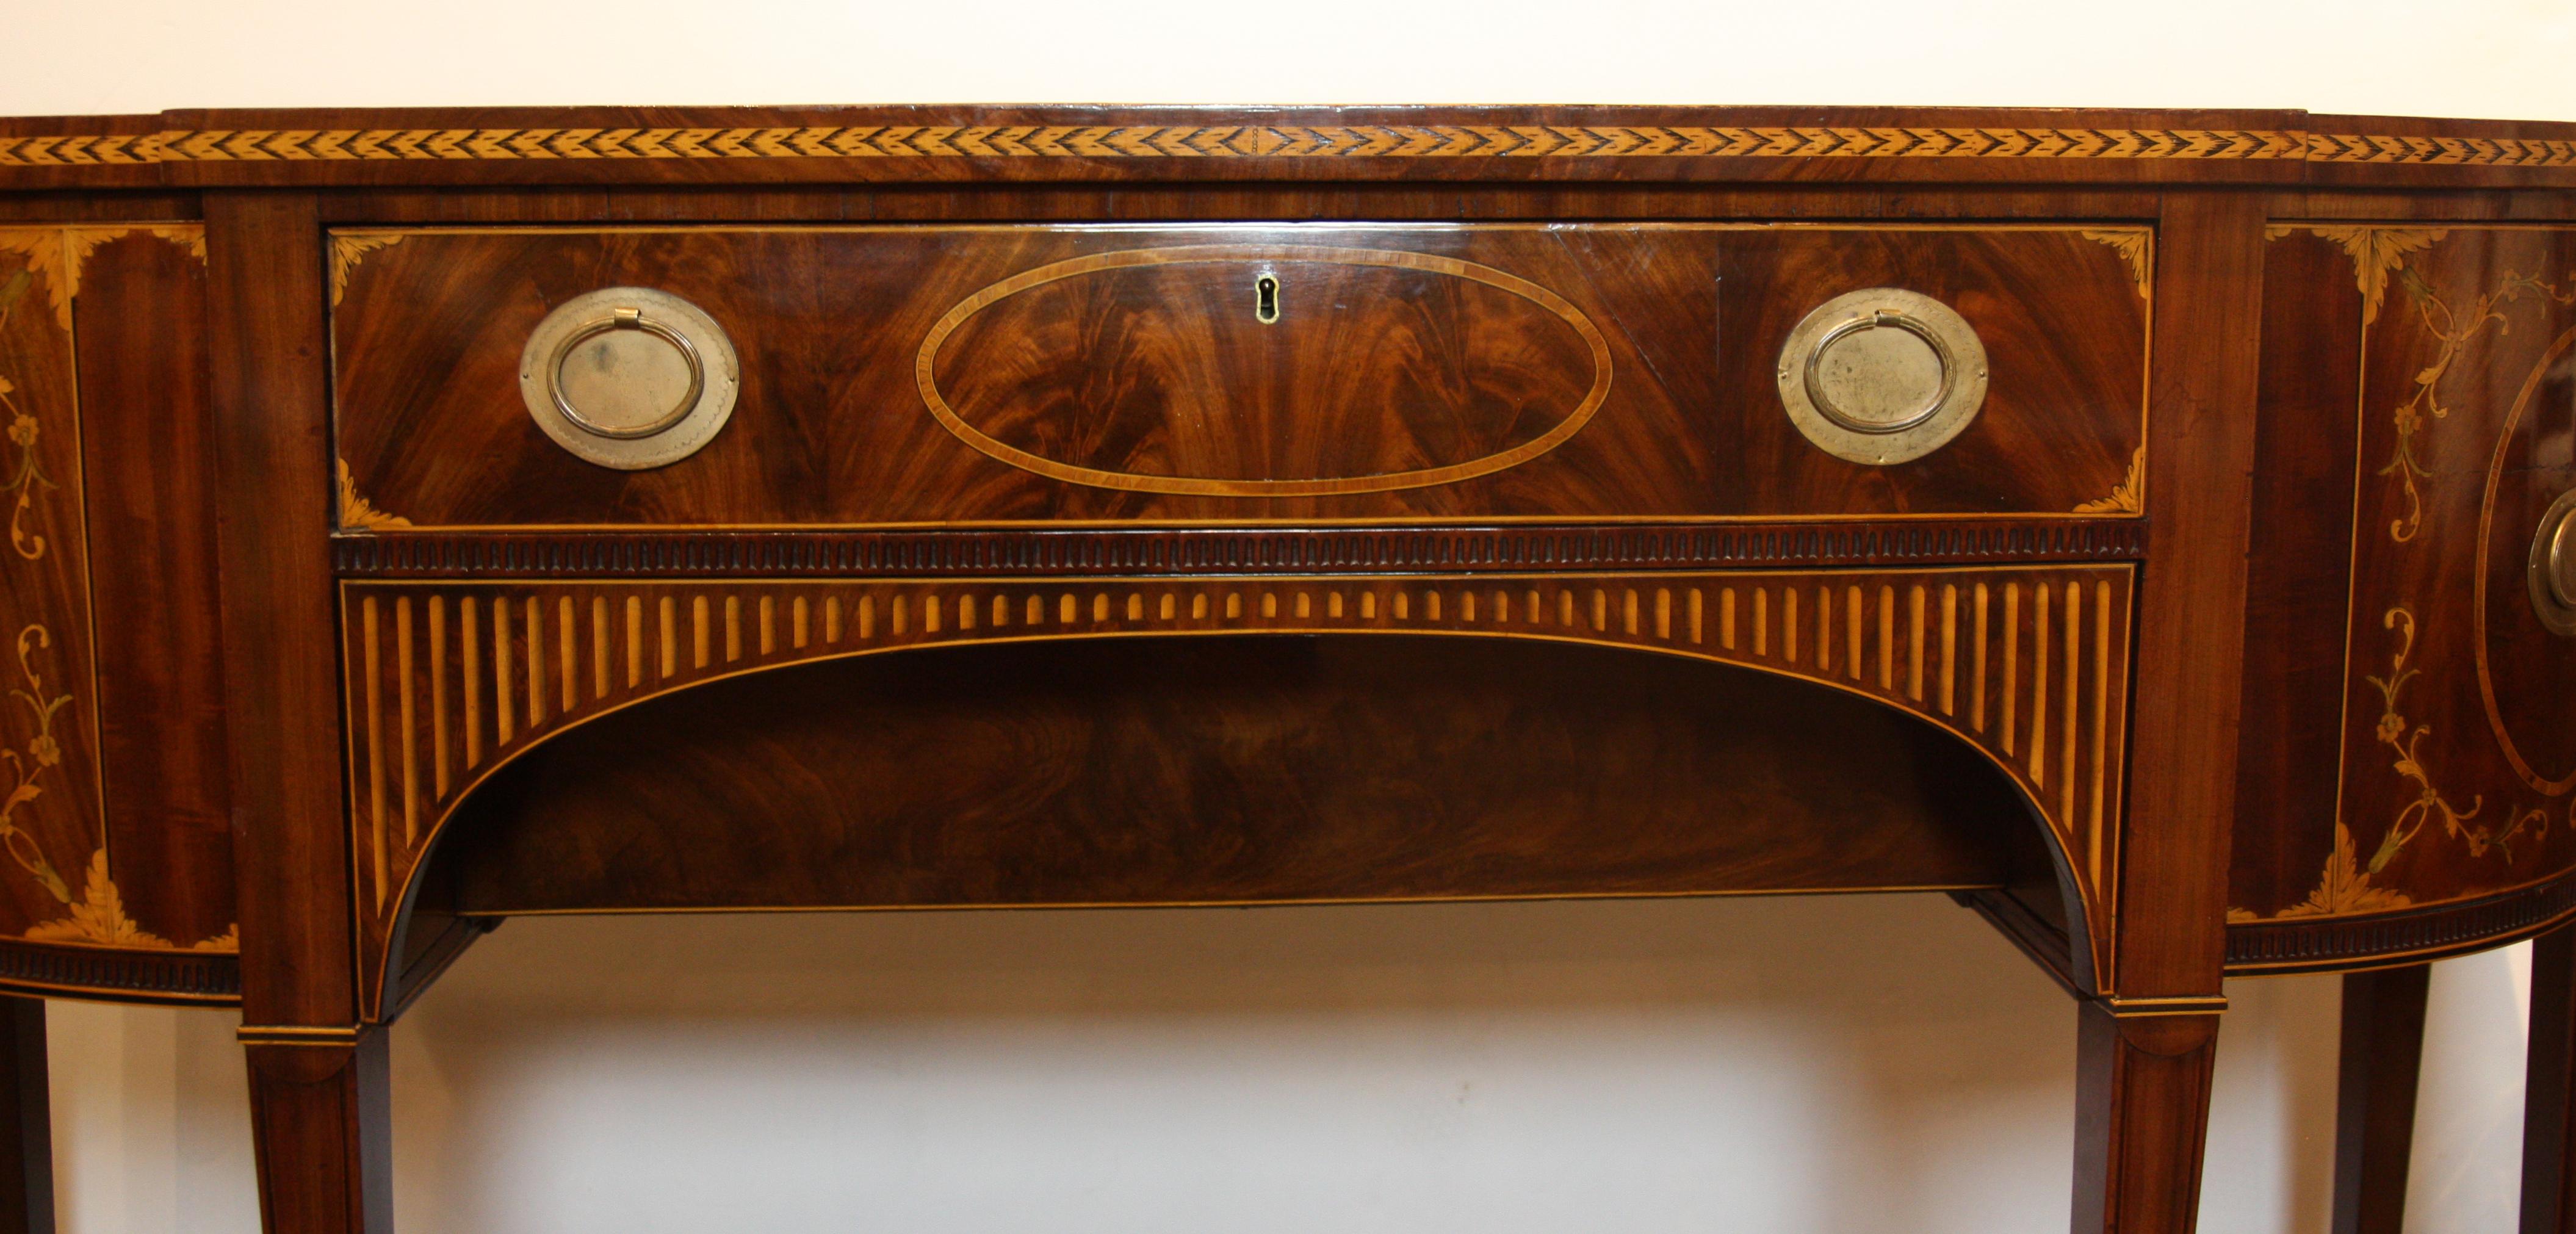 Early 19th Century American Hepplewhite style Sideboard Matched Mahogany Veneers In Good Condition For Sale In San Antonio, TX